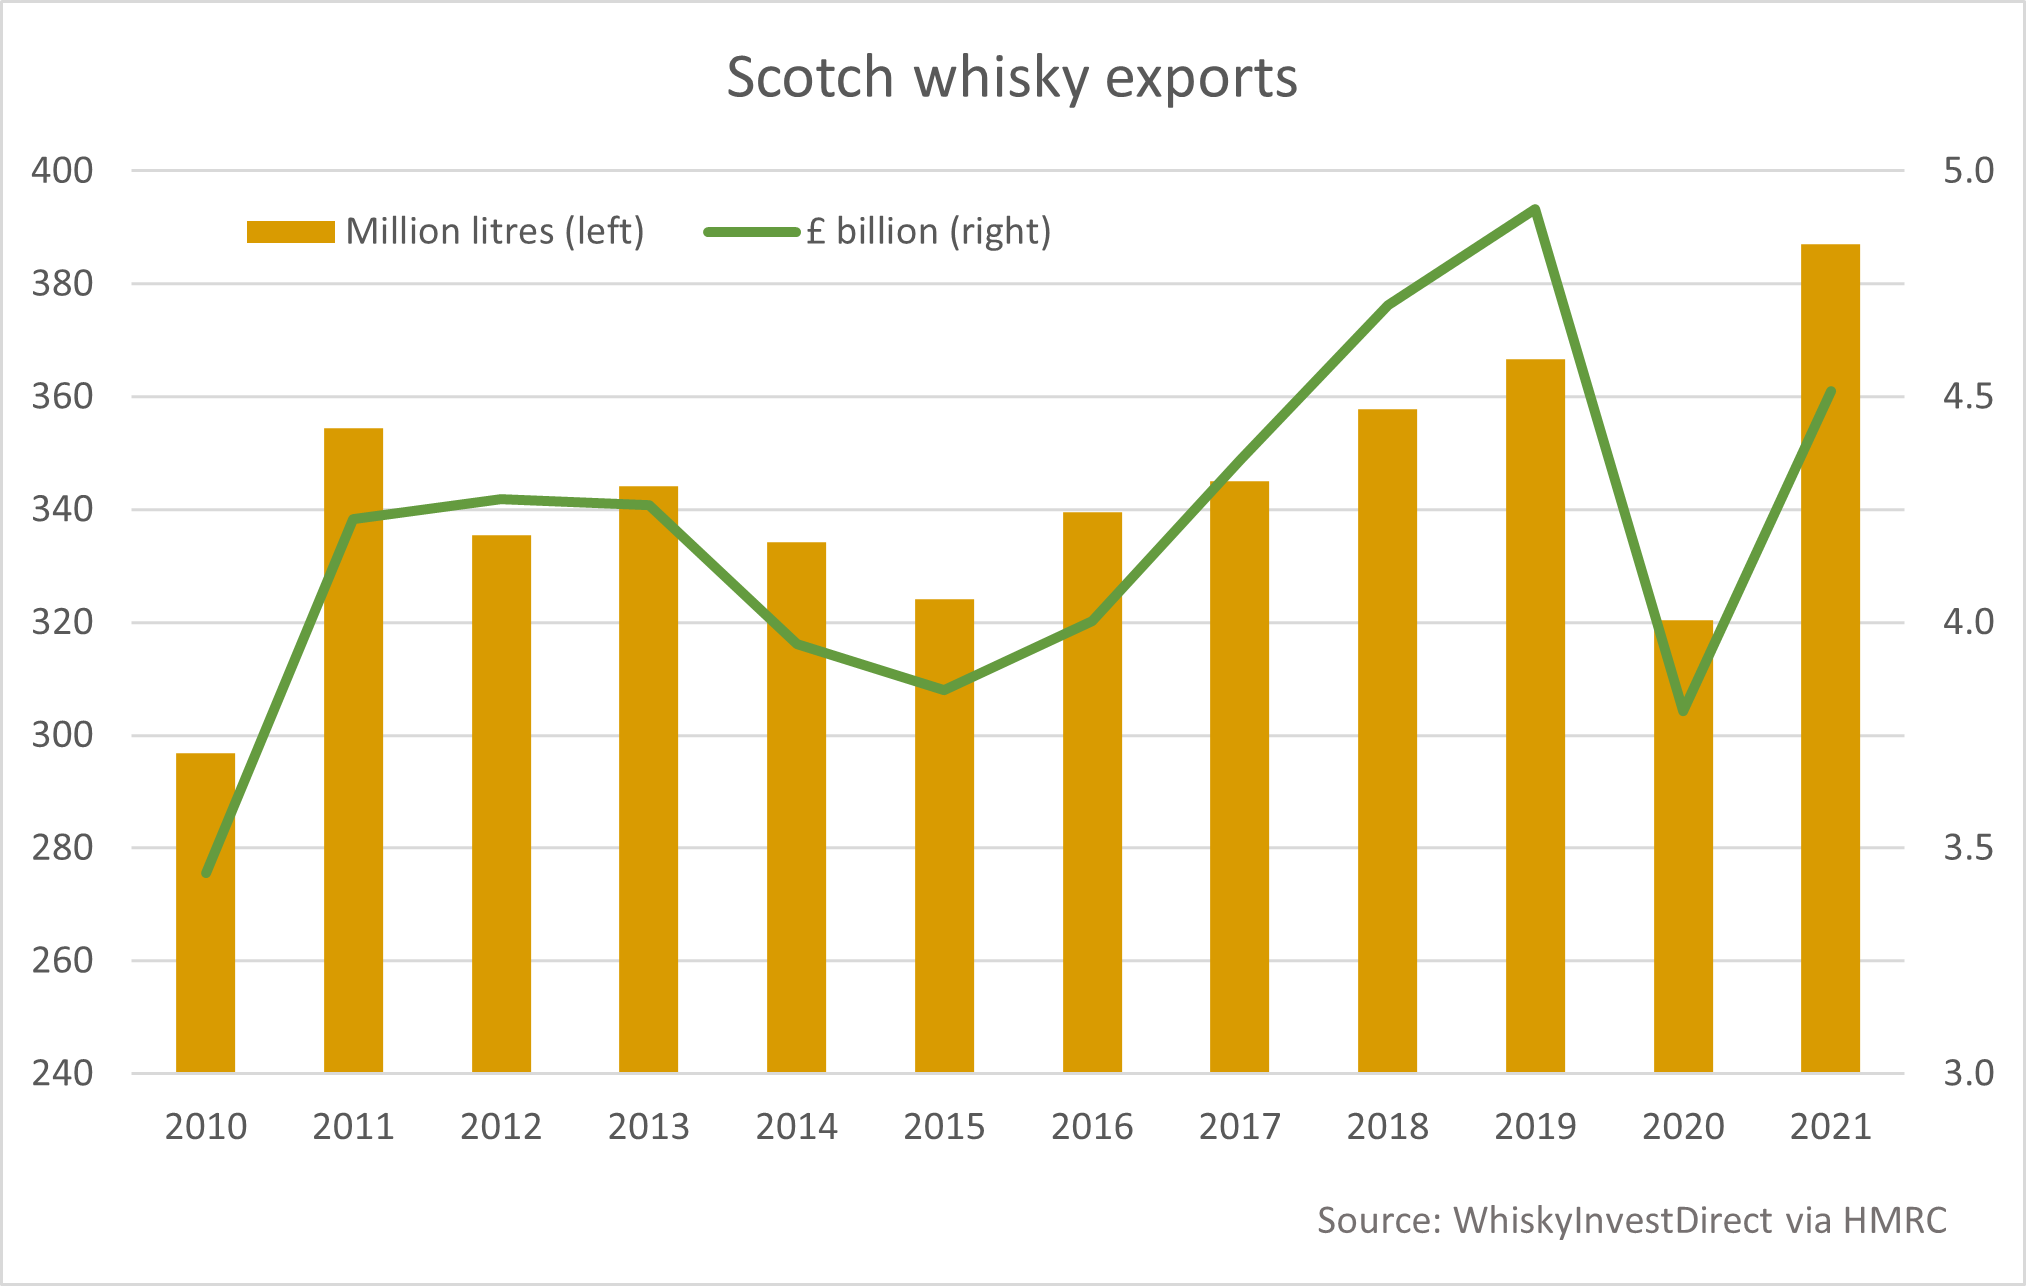 After a tough year in 2020, Scotch whisky exports have soared back to record levels